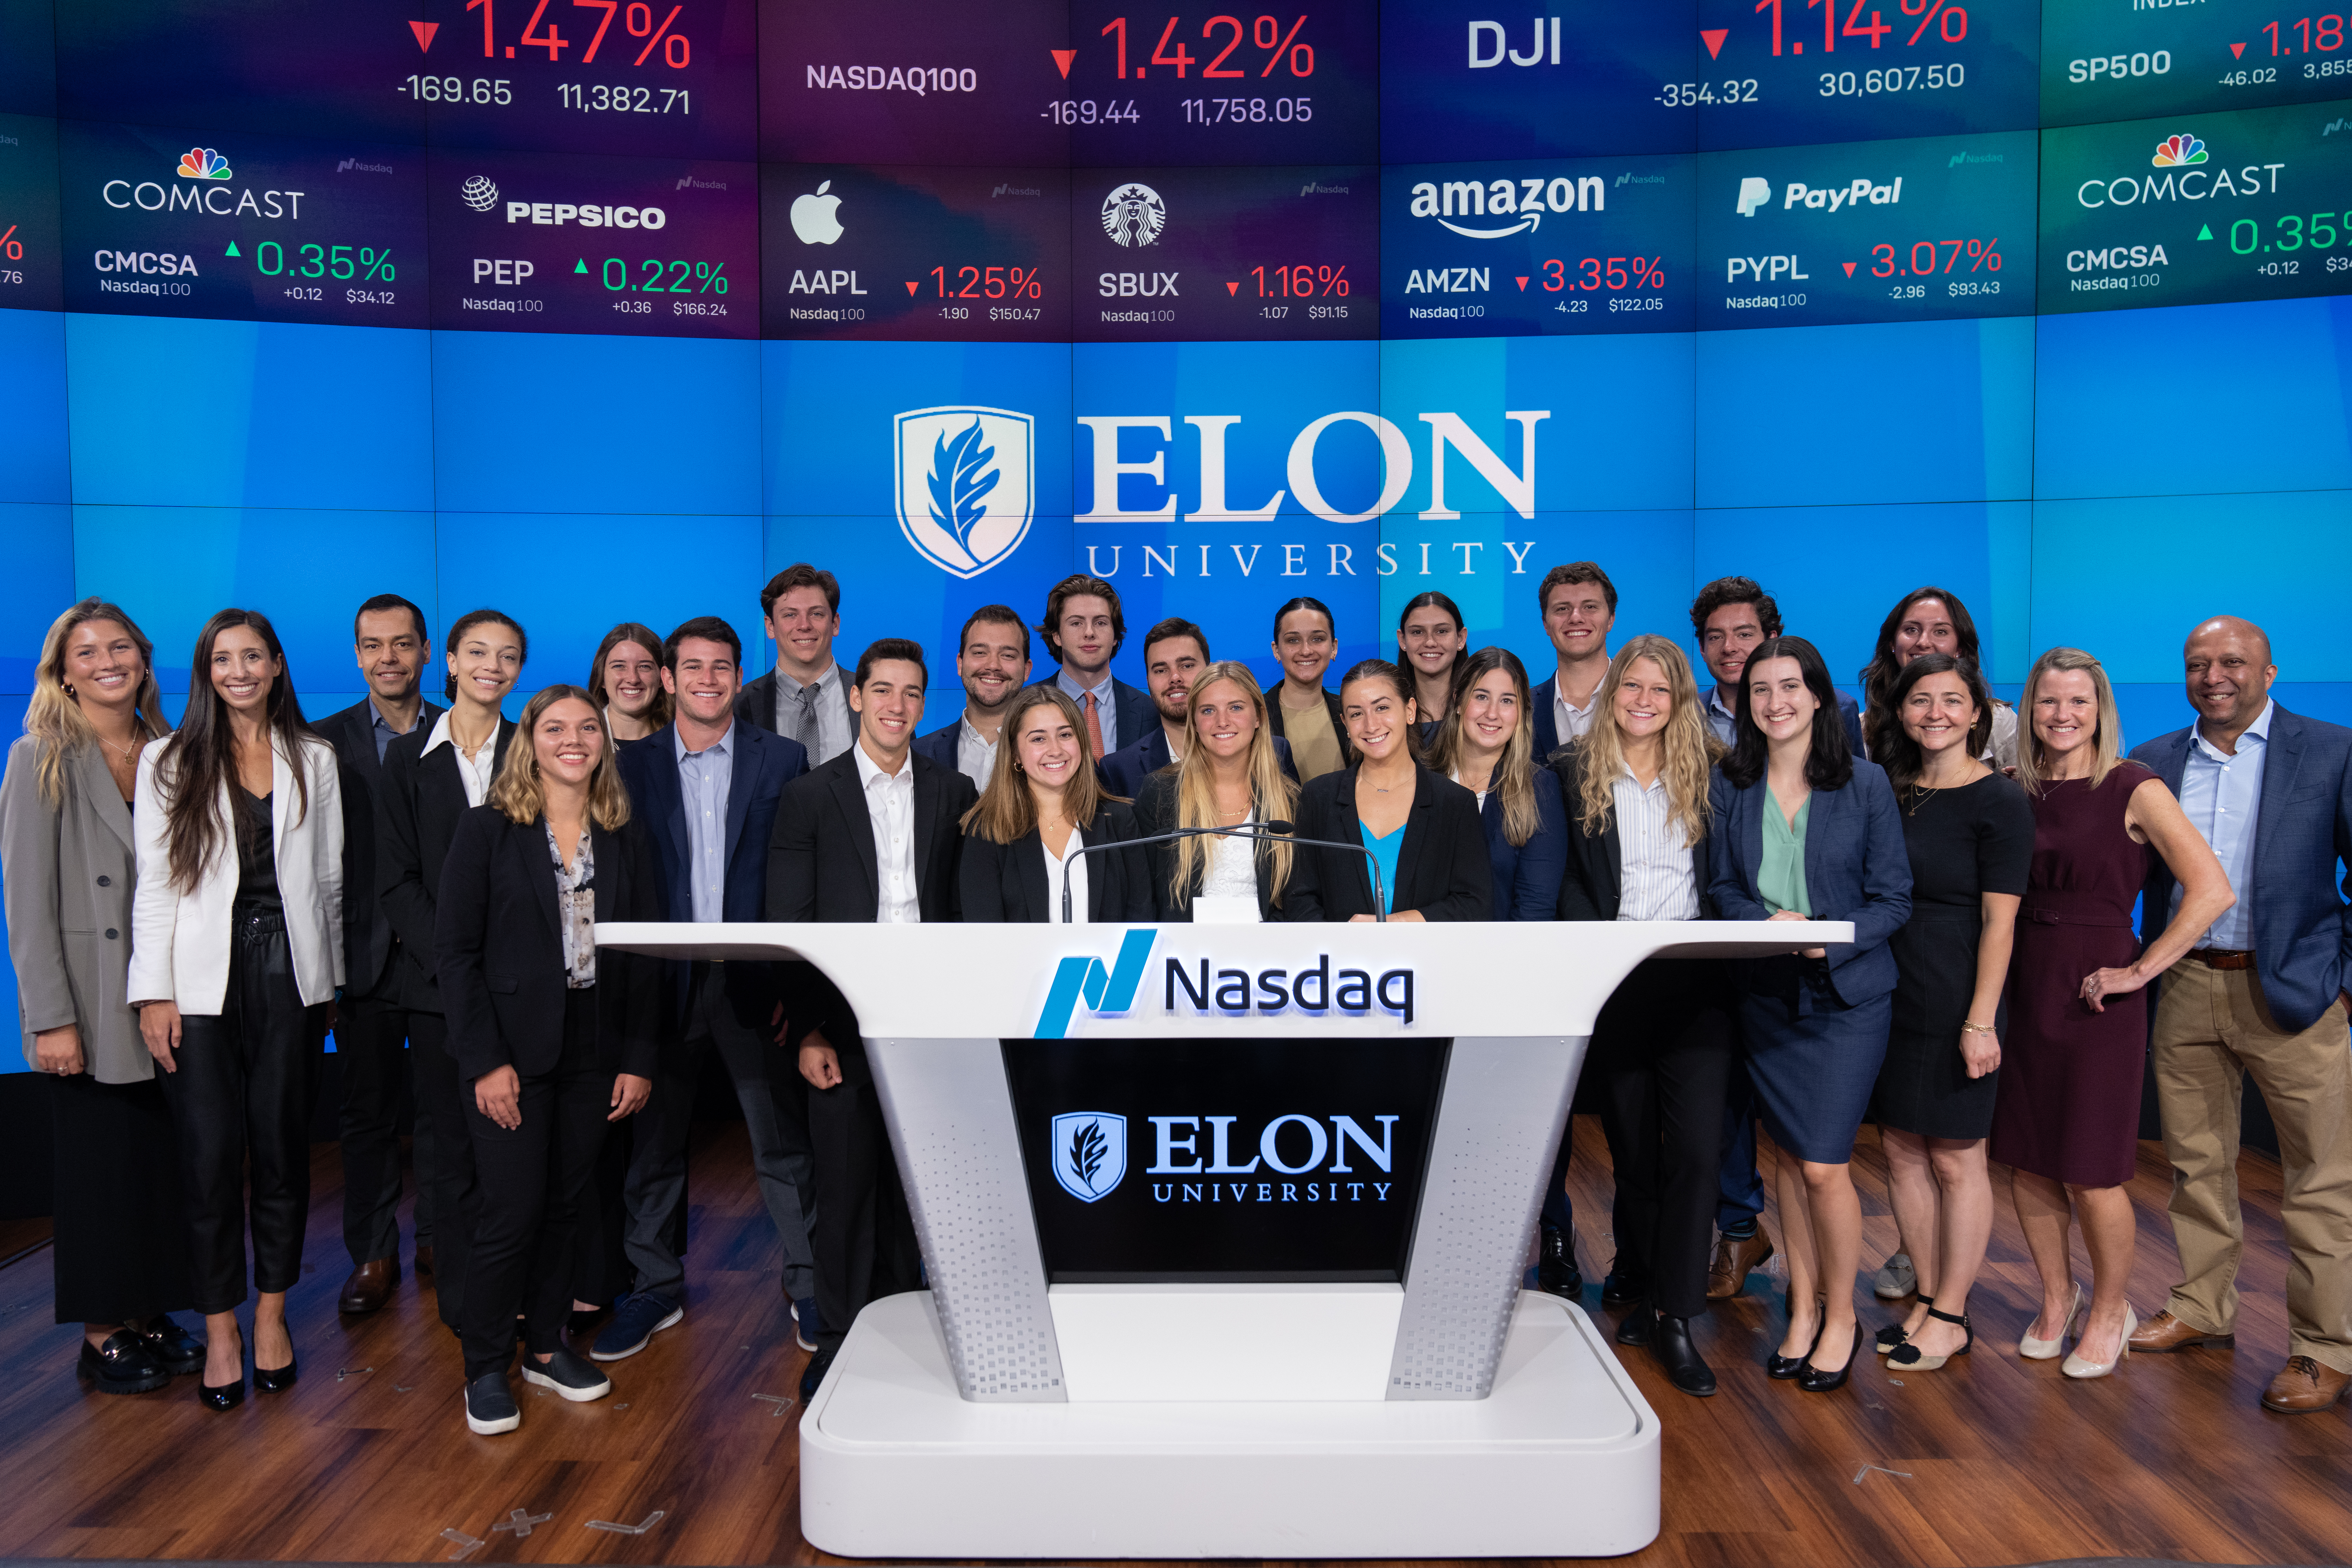 Group of students, faculty and staff standing beneath stock signs and behind lectern that says Nasdaq and Elon University